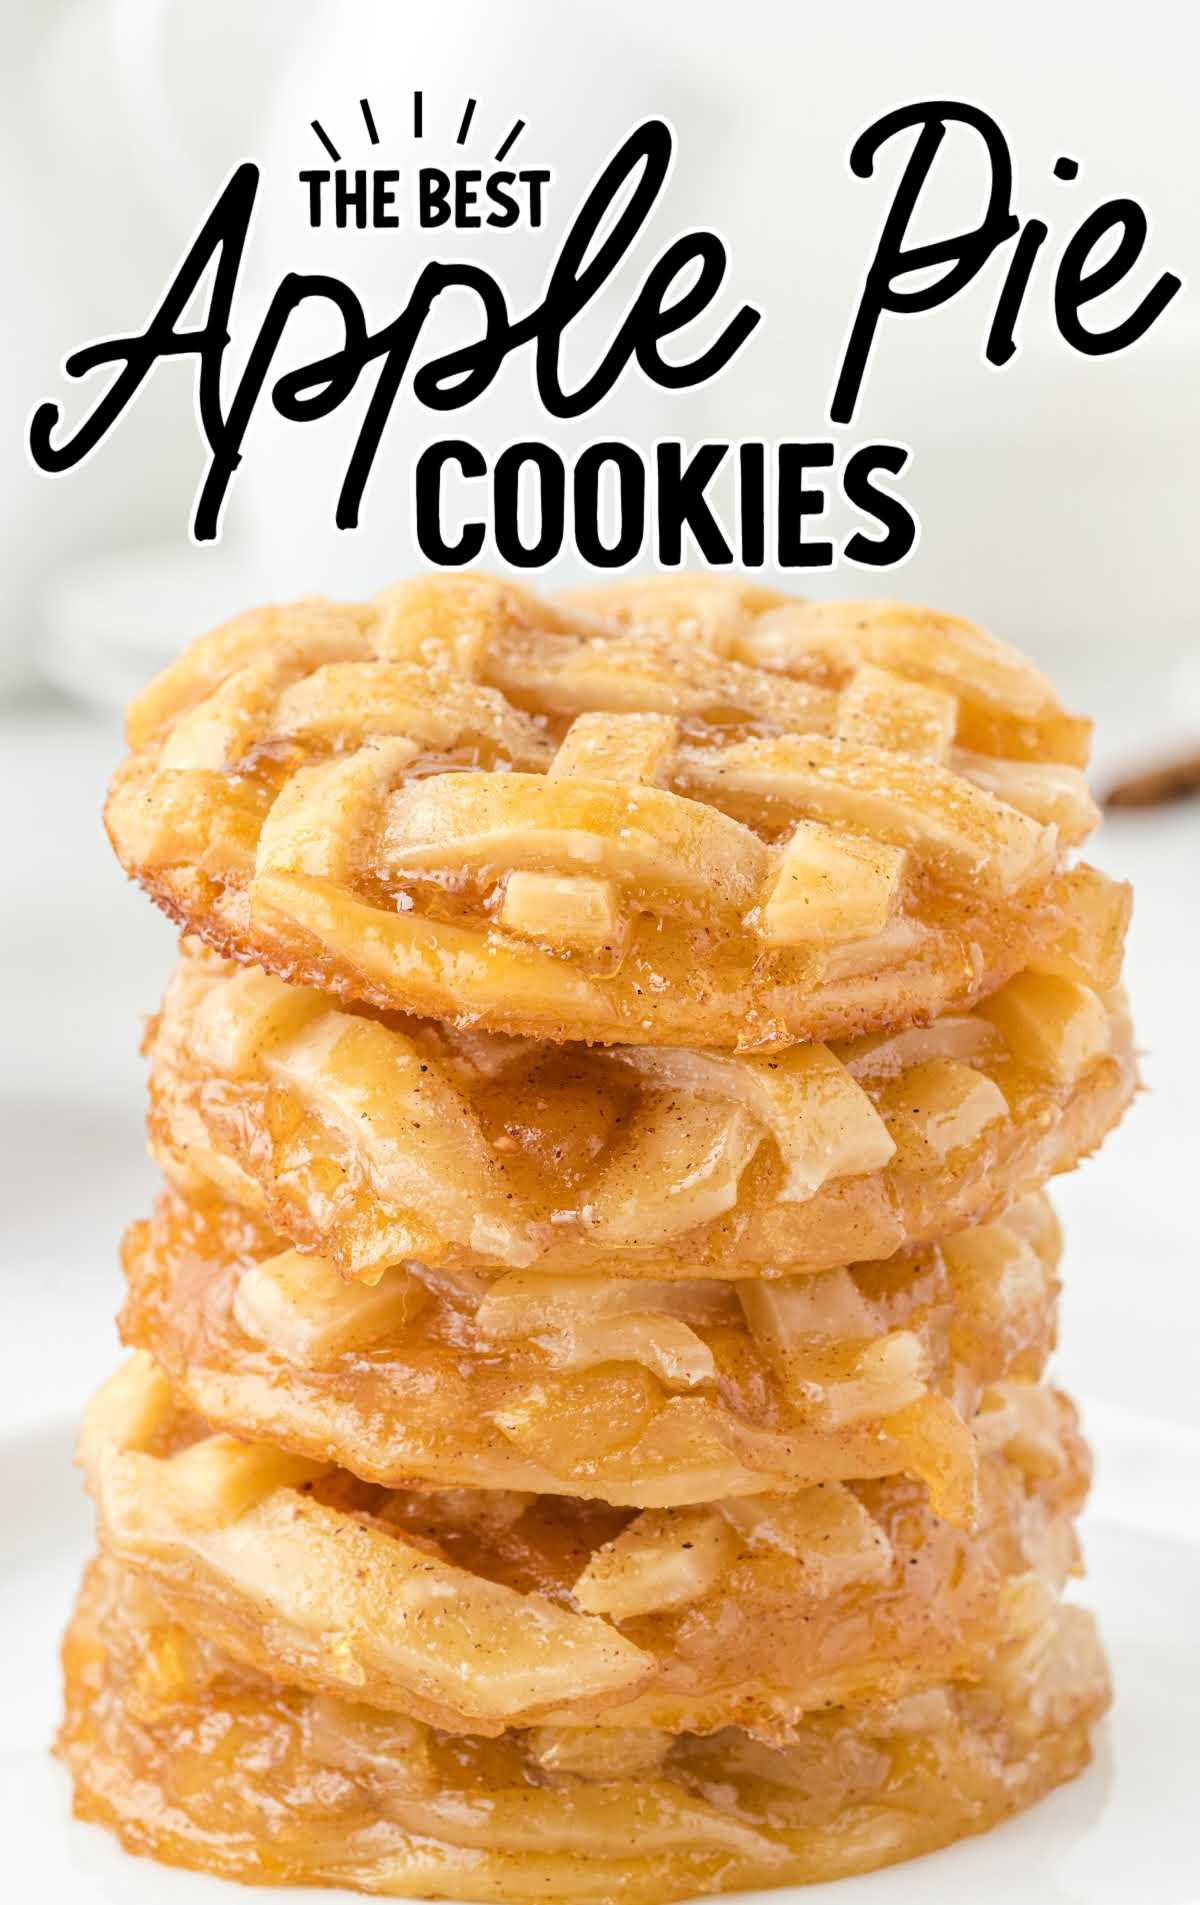 Apple Pie Cookies stacked on top of each other on a plate